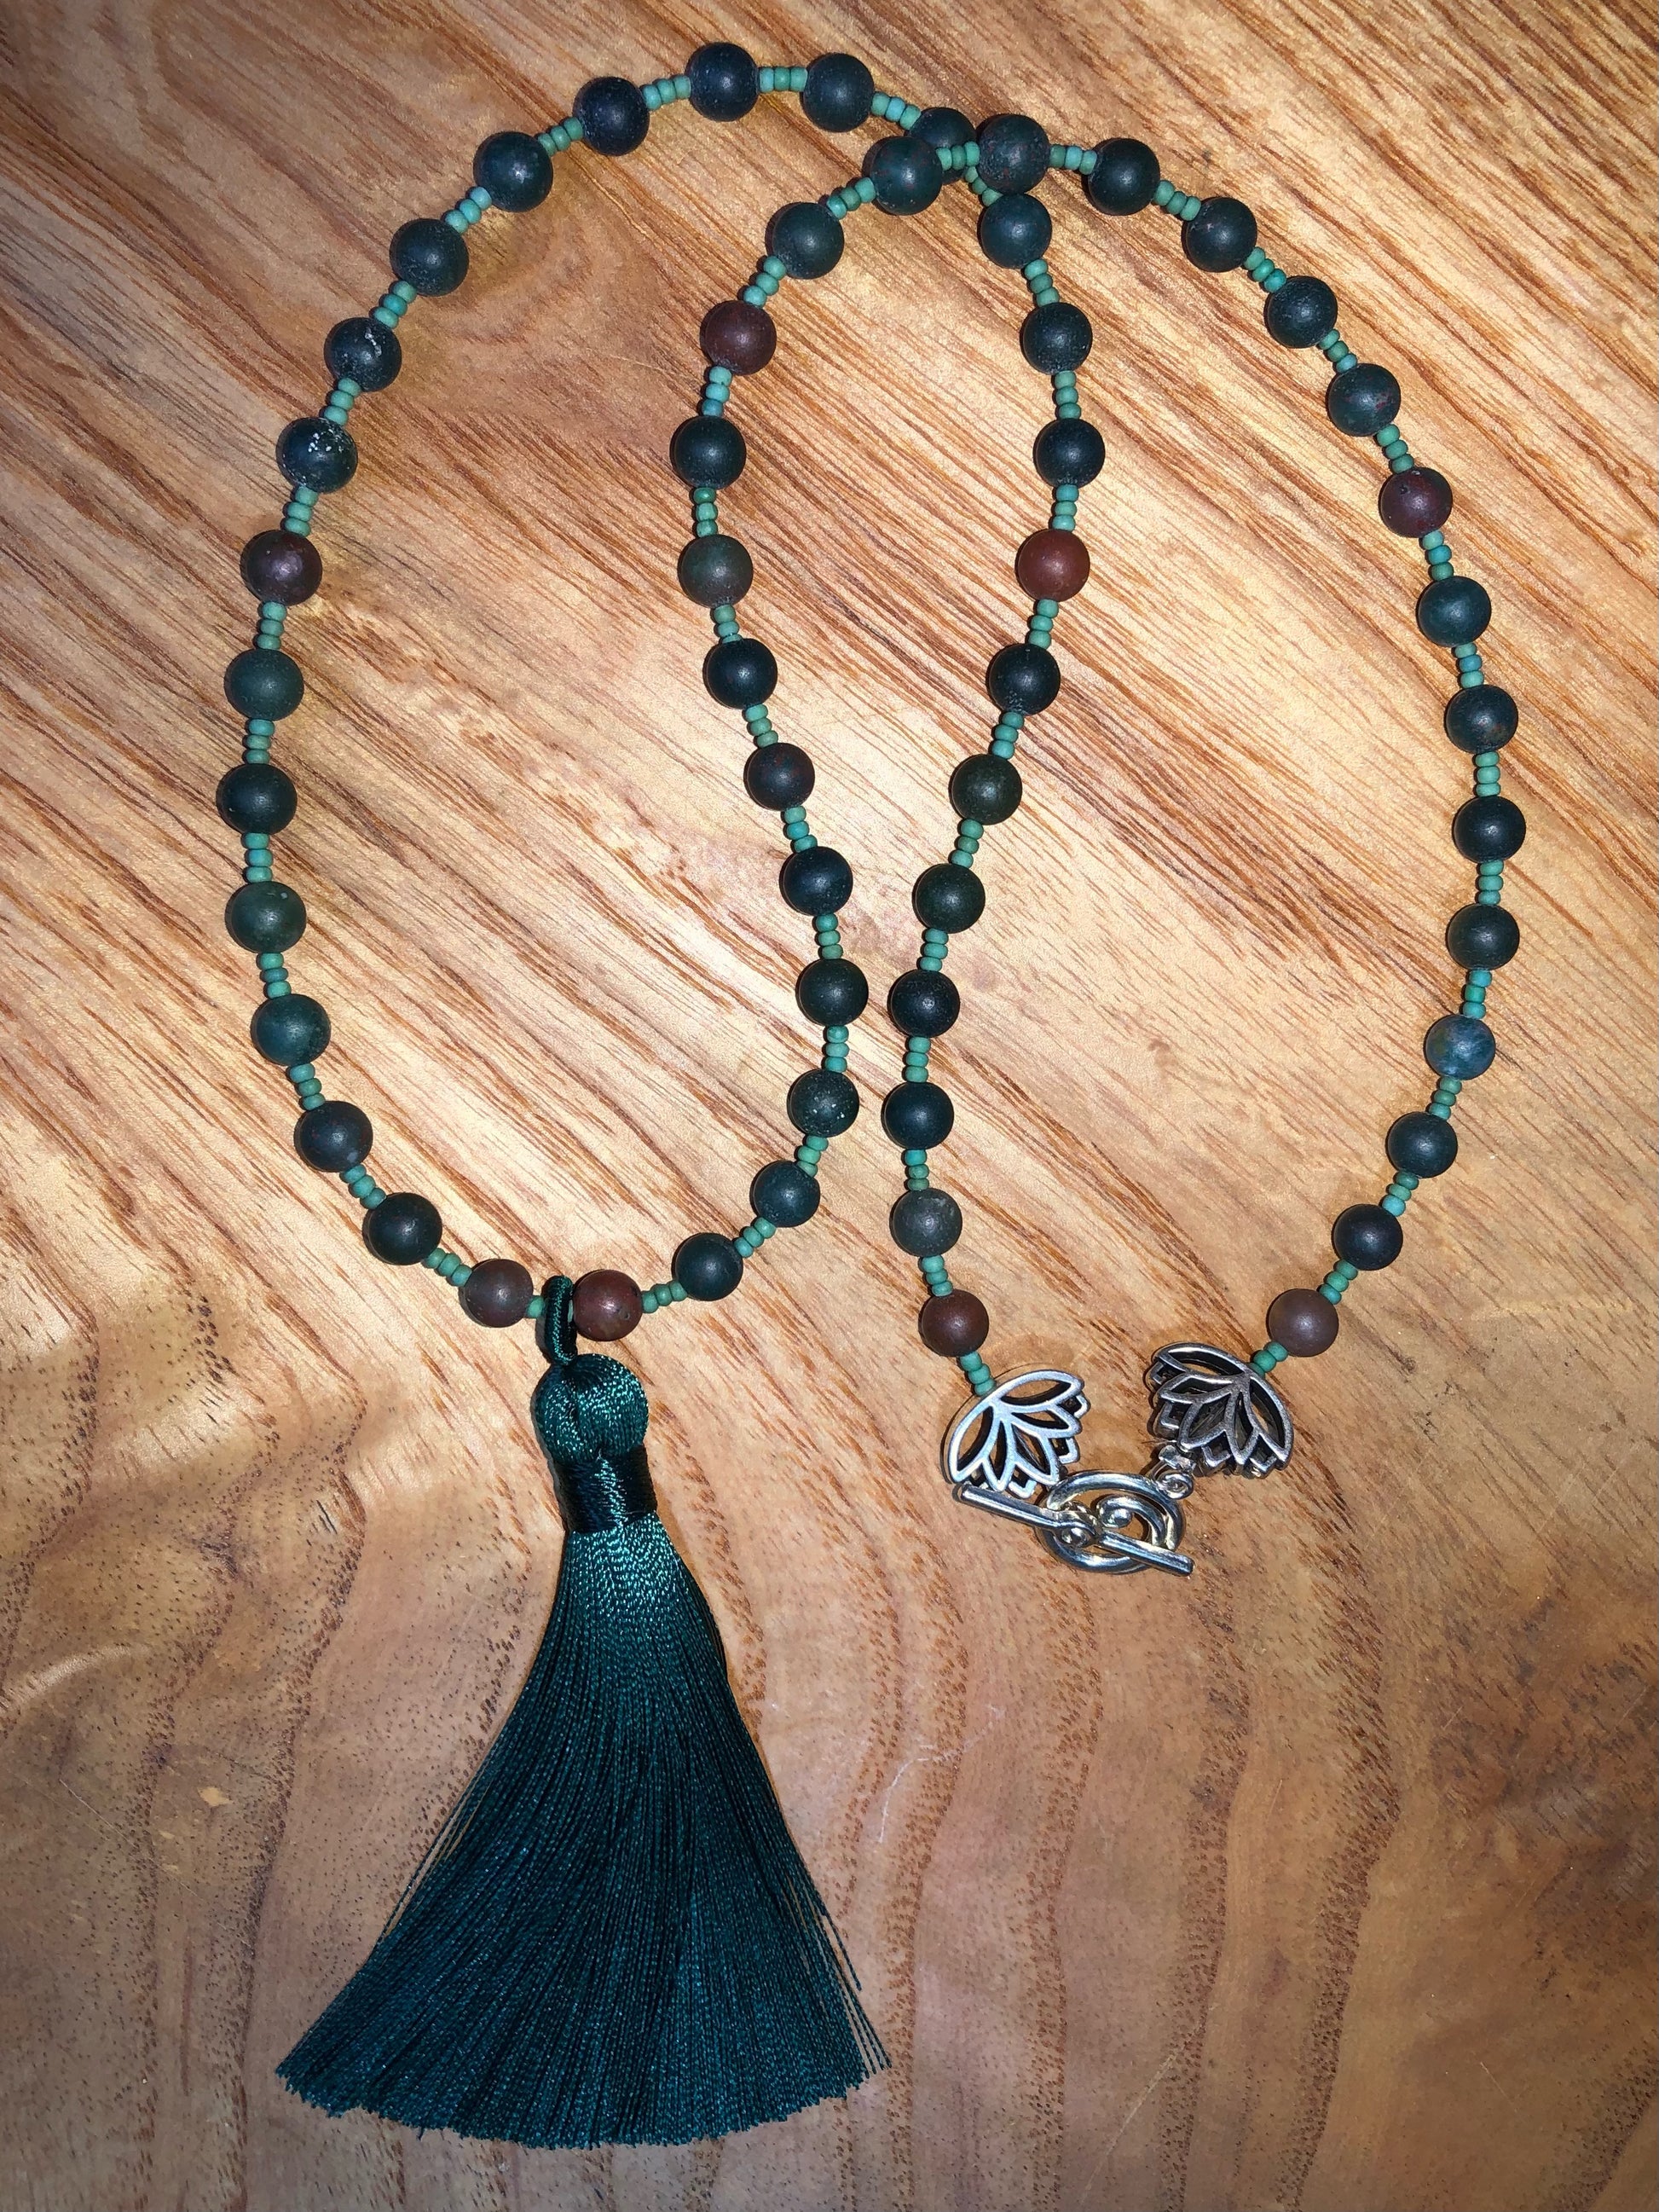 54 bloodstone beaded mala with green glass seed beads, silver plated lotus beads, and 3.54" green tassel.